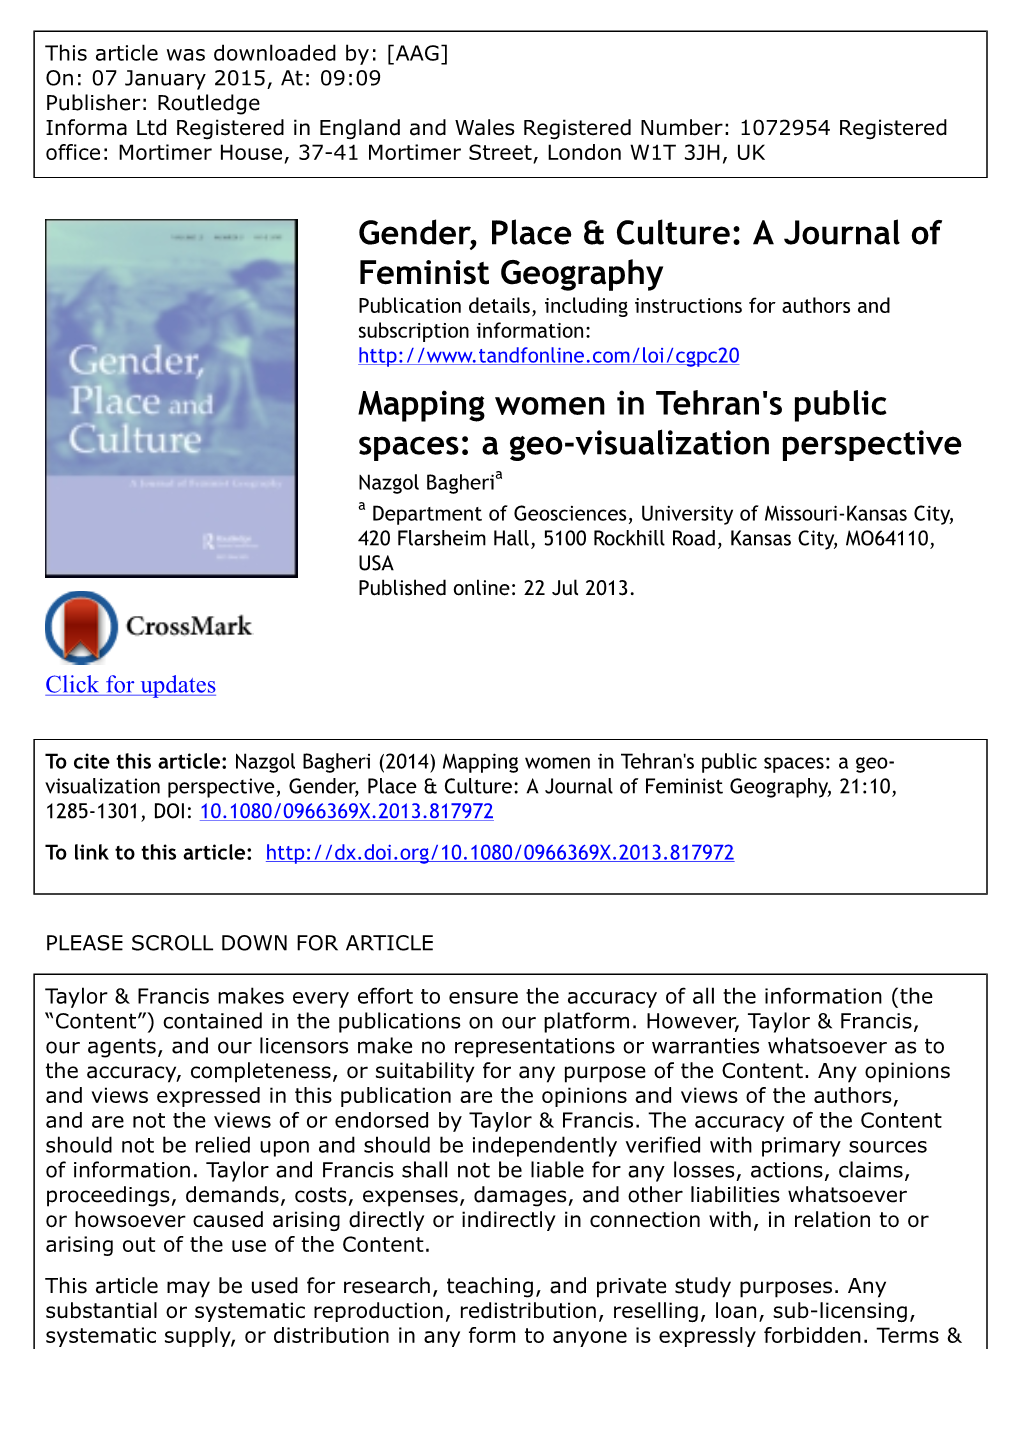 A Journal of Feminist Geography Mapping Women in Tehran's Public